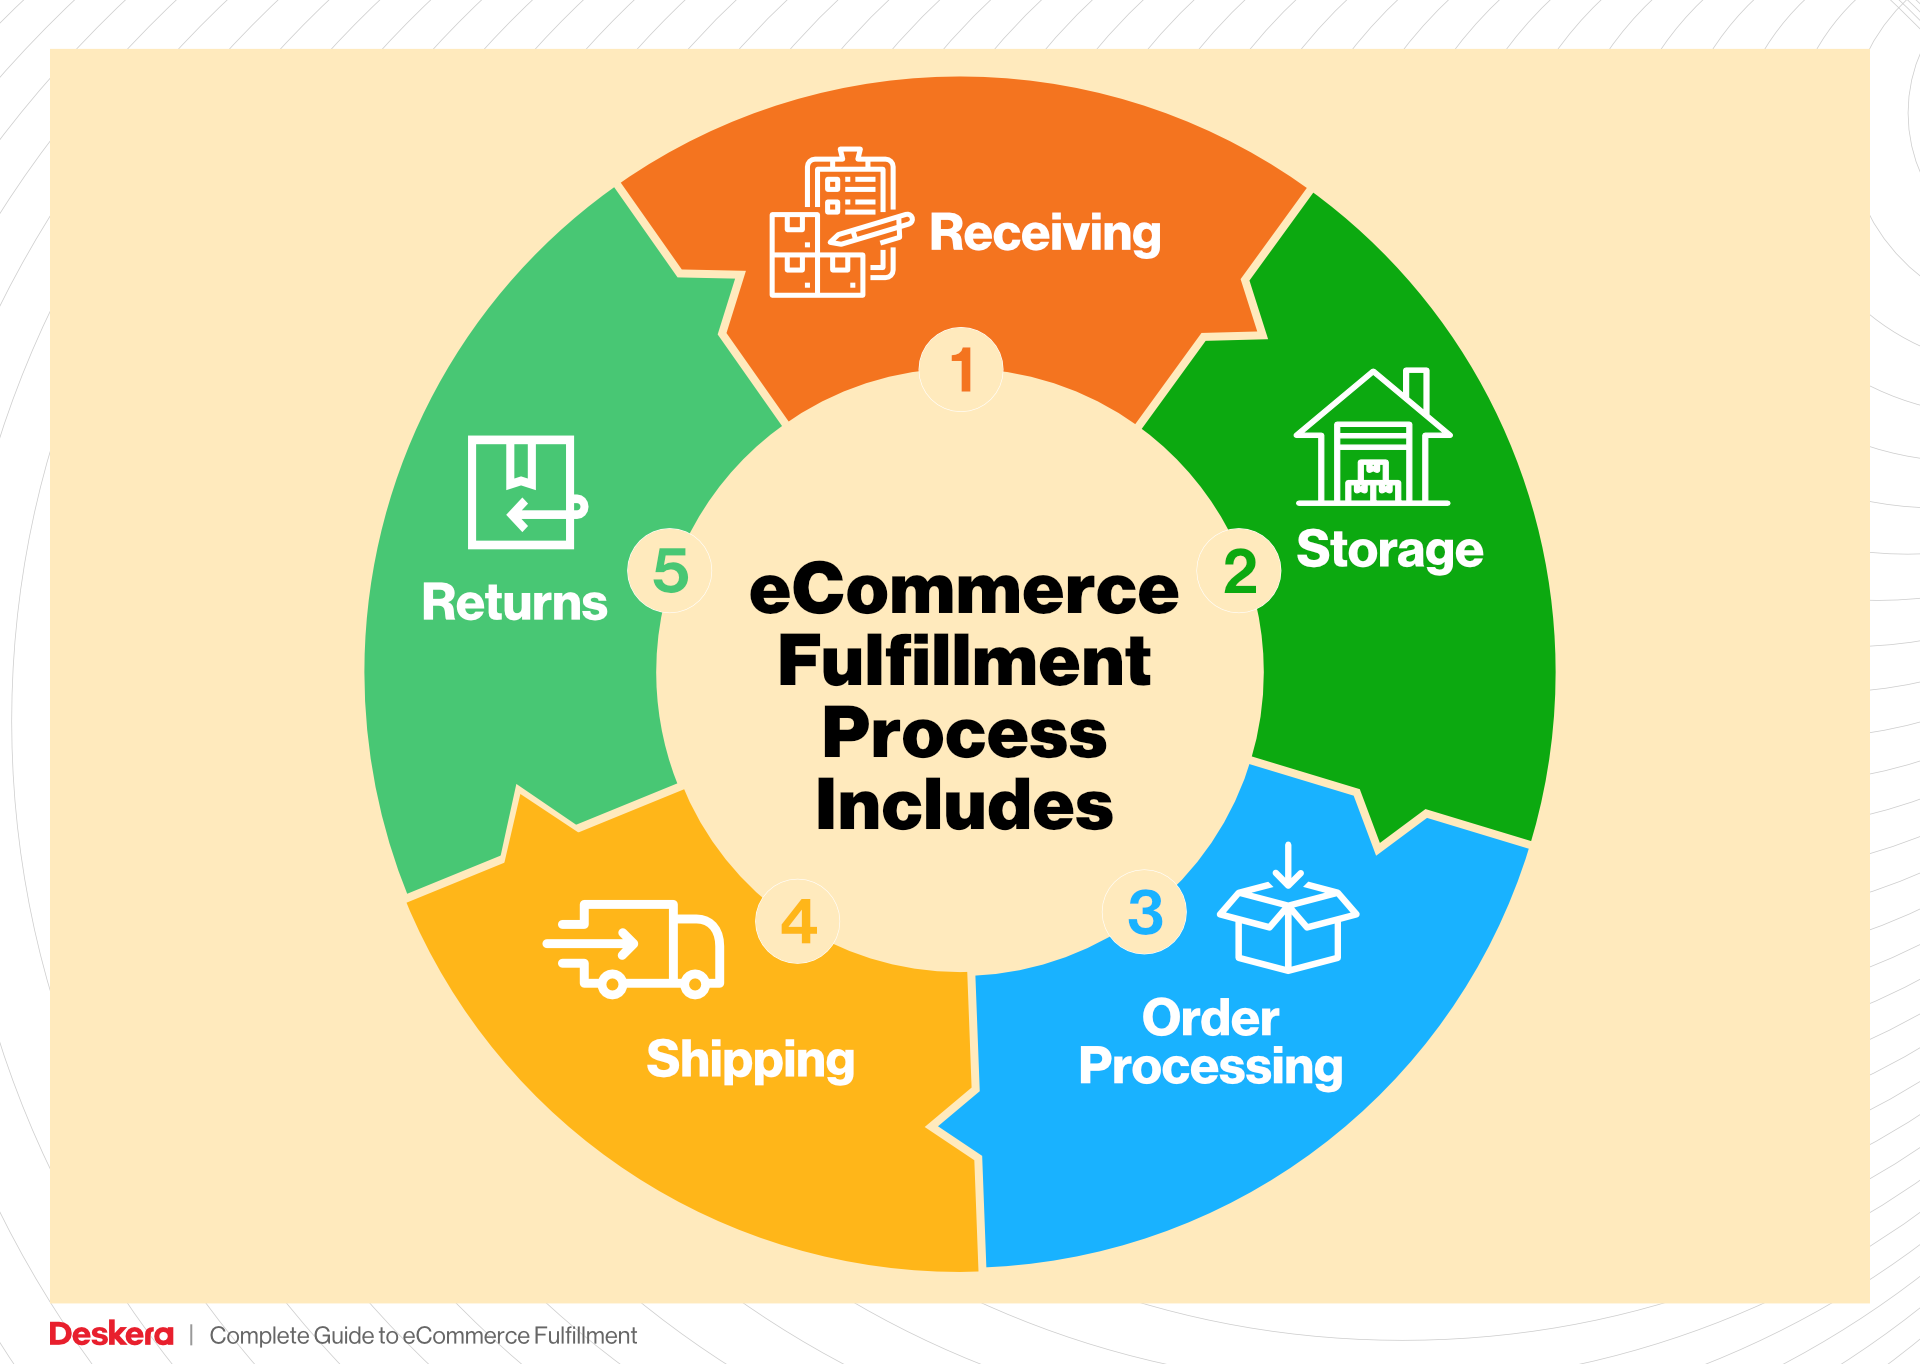 eCommerce Fulfillment Process Includes These 5 Processes